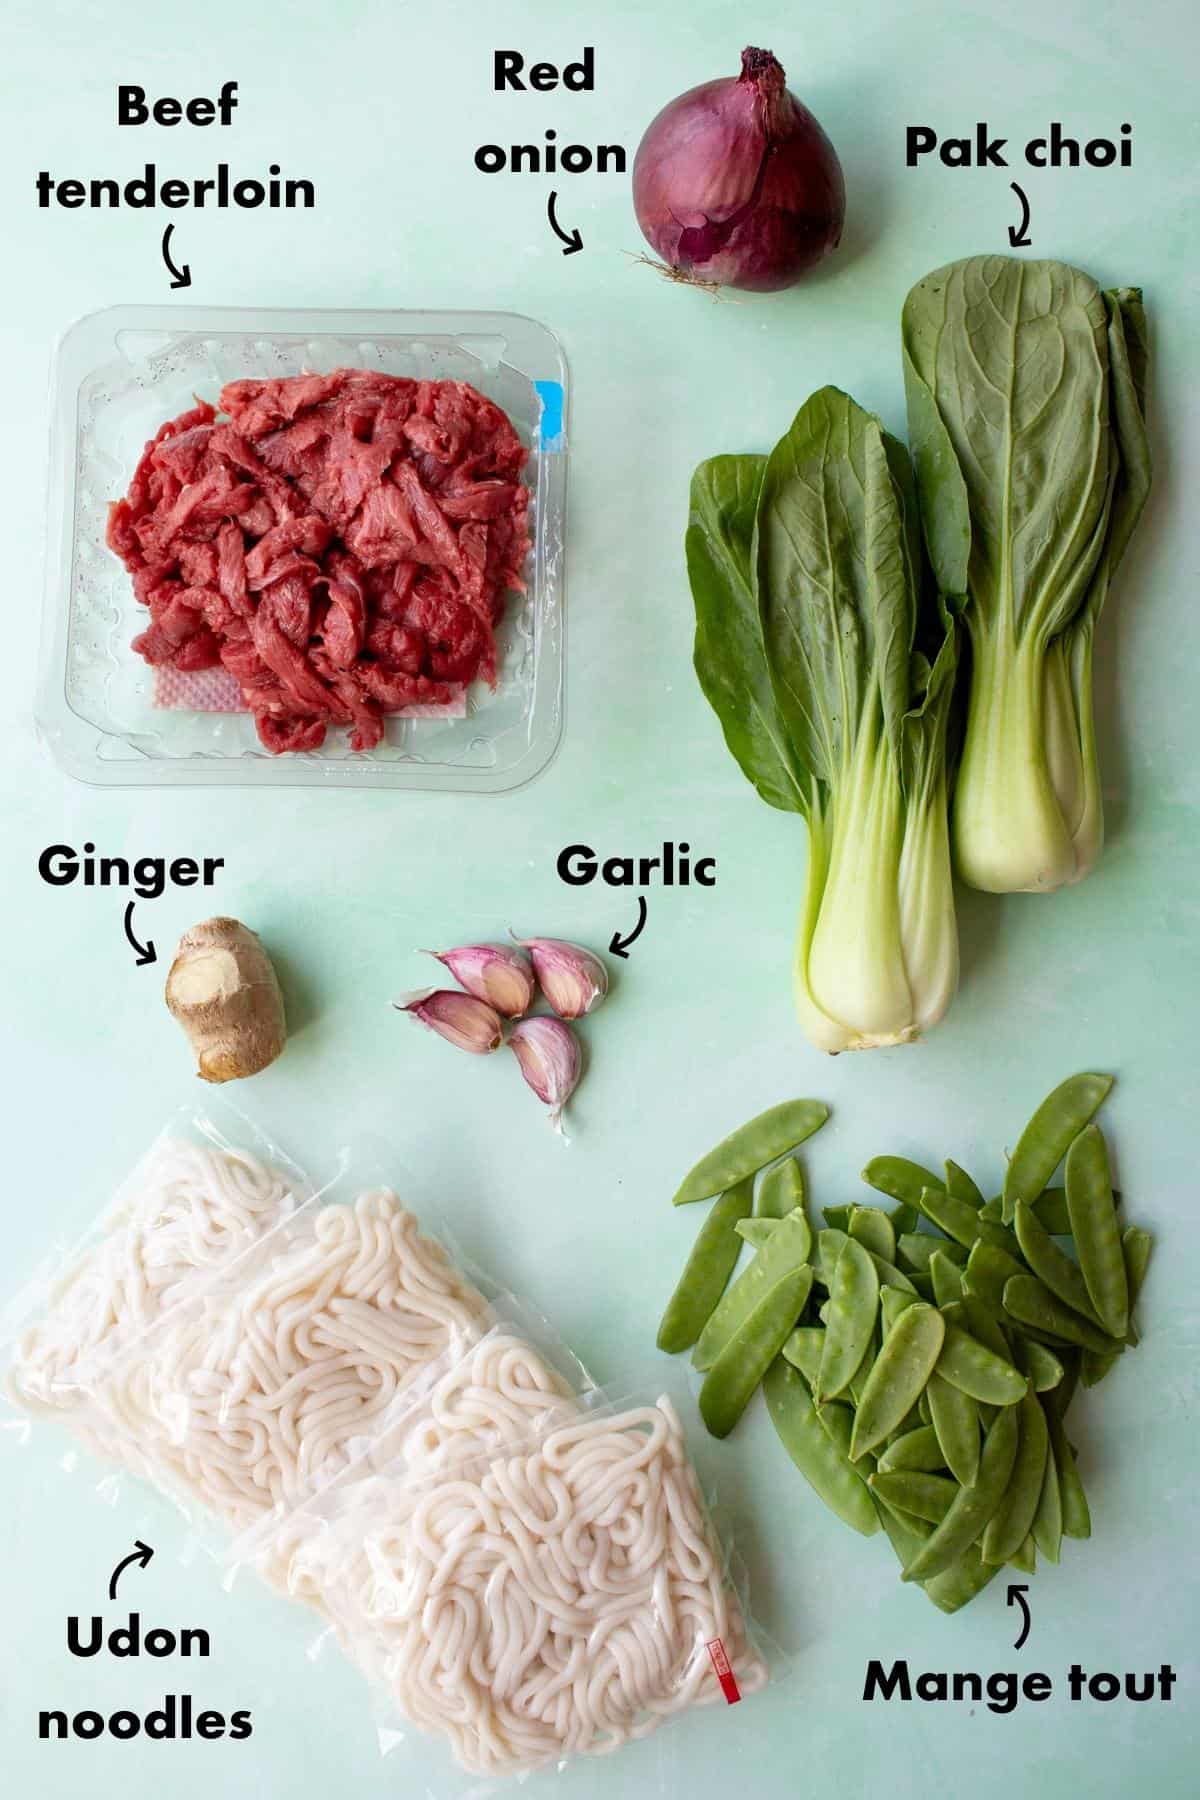 Ingredients to make Beef udon noodles recipe laid out on a pale blue background and labelled.